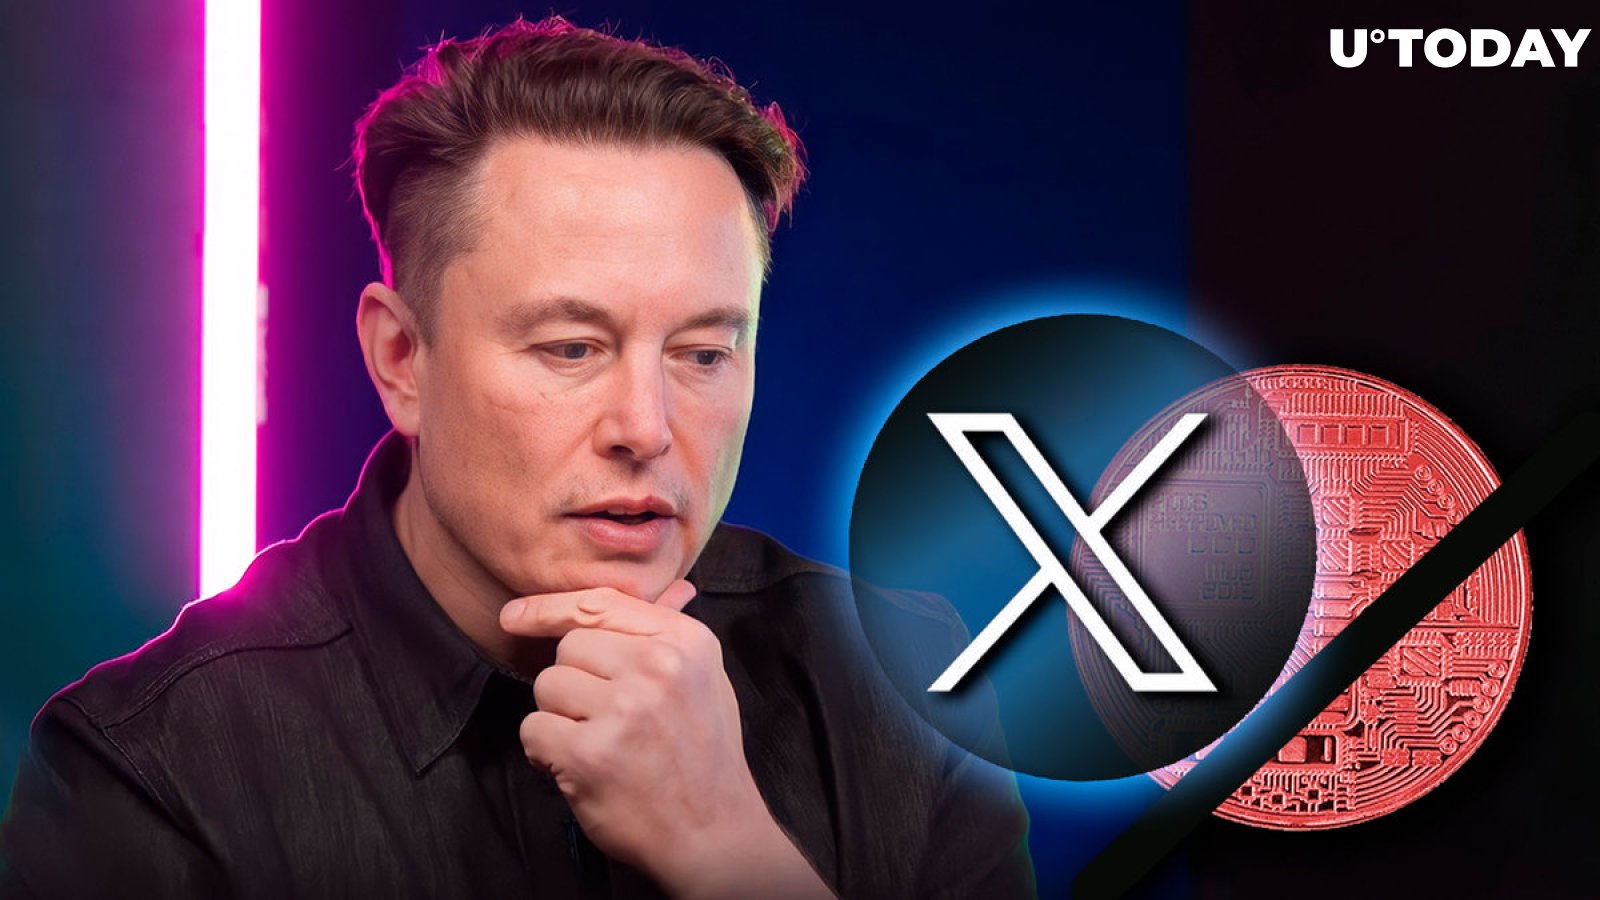 No, Elon Musk Will Not Allow Crypto or Stock Trading on Twitter